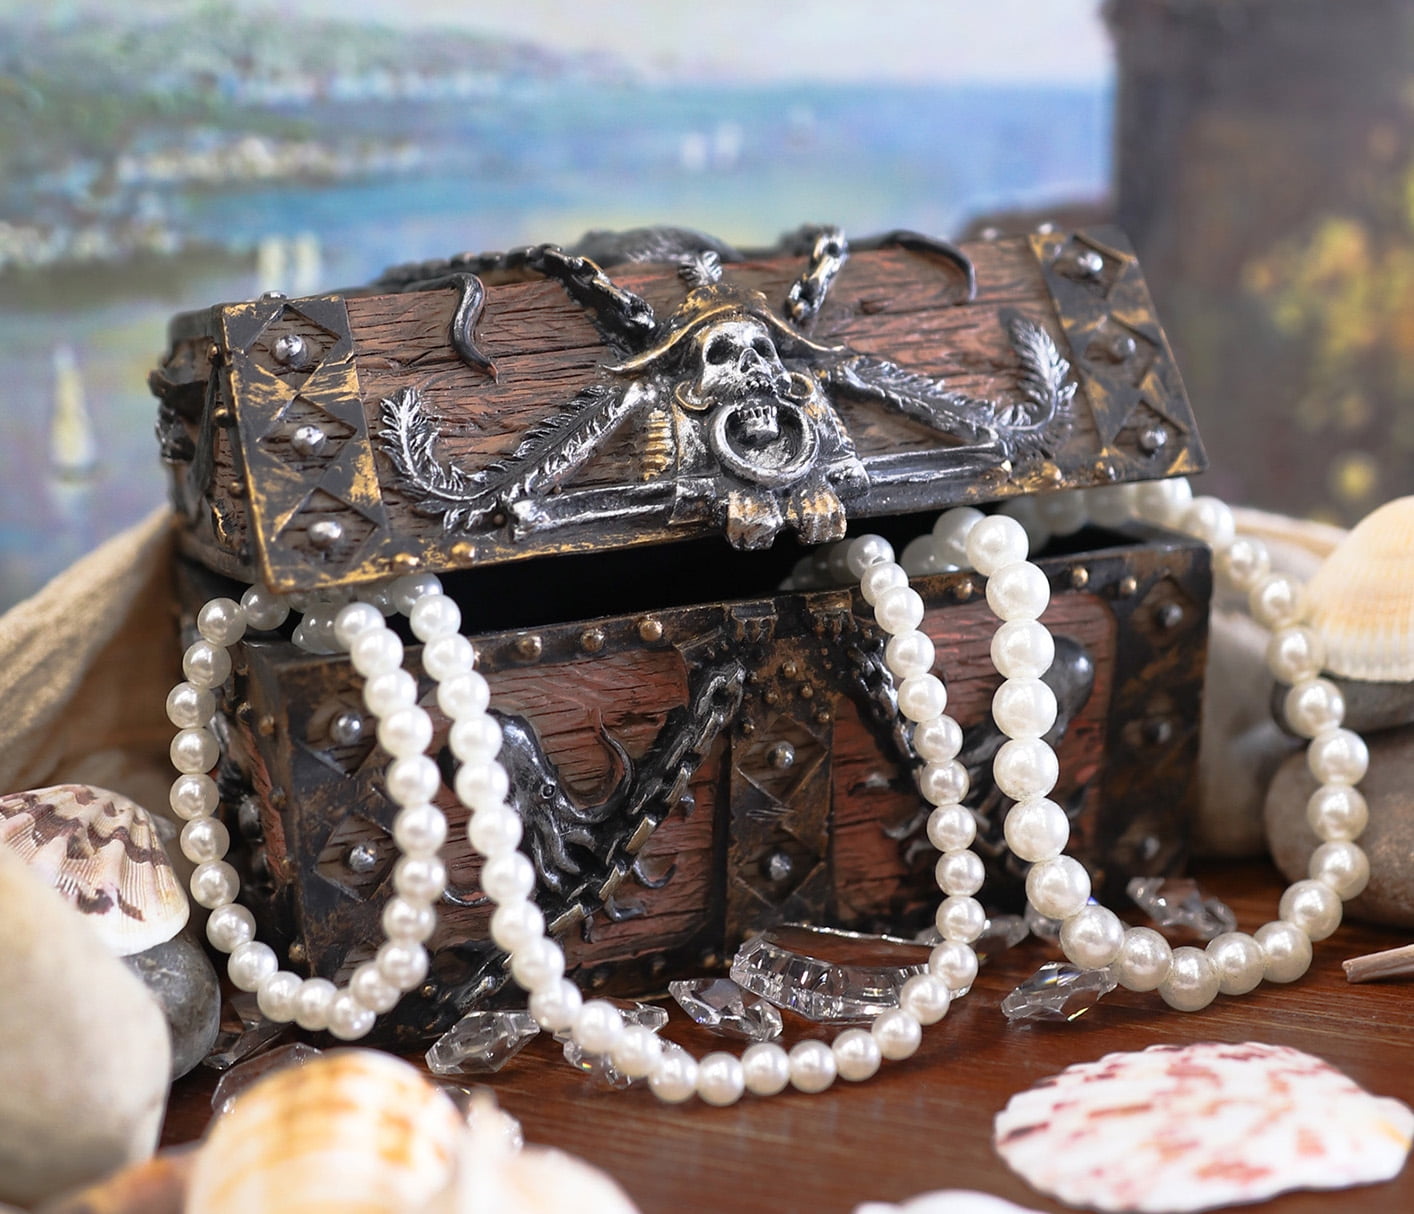 Pirate & Castle Jewelry with Treasure Chest Deluxe BlingBlingBrick 